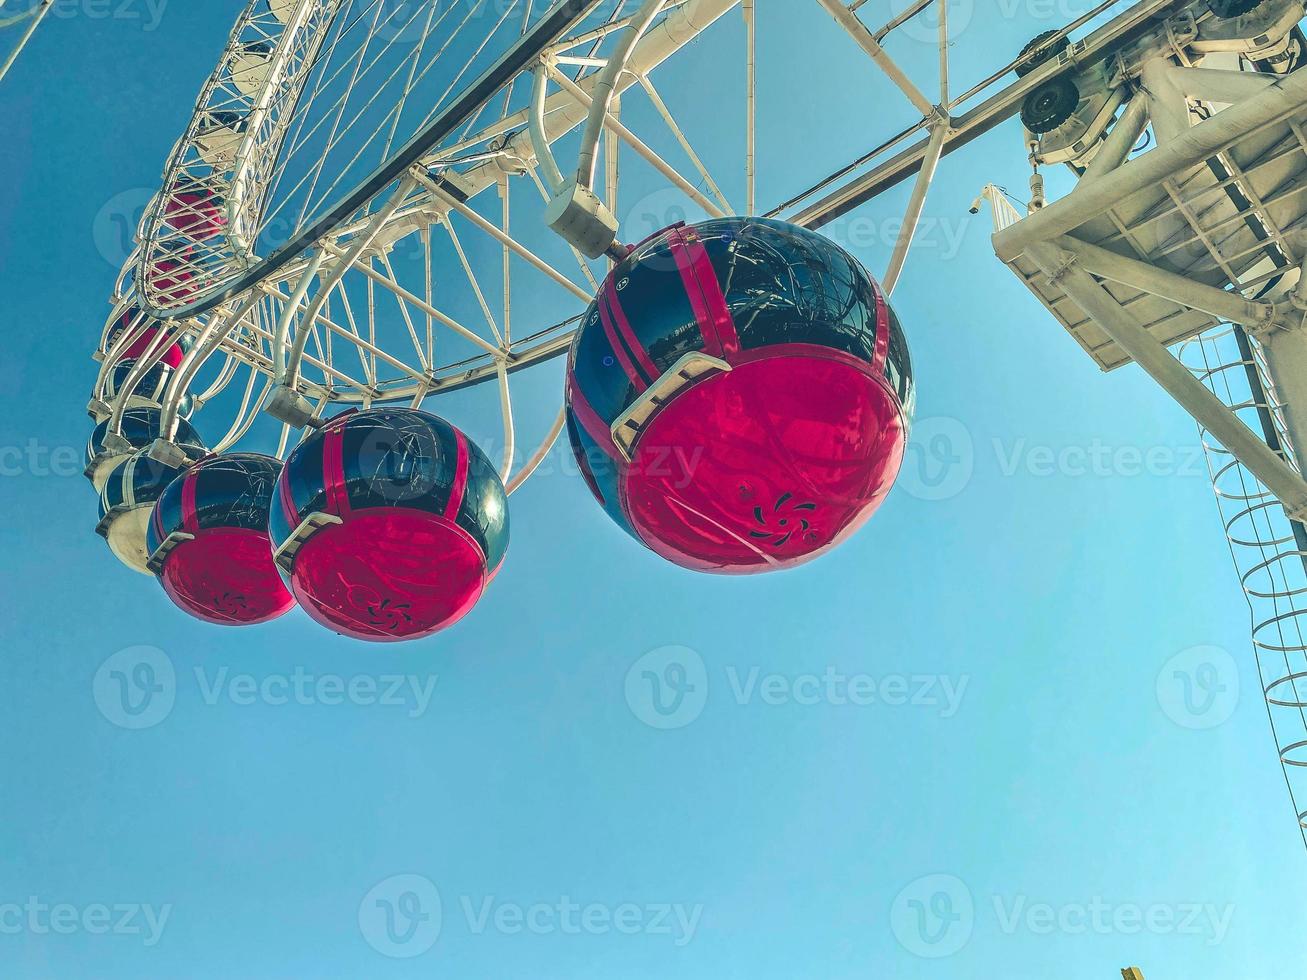 amusement park. ferris wheel made of white metal. on the wheel there are large cabins for skiing tourists of red color with black, tinted windows for protection against spf photo